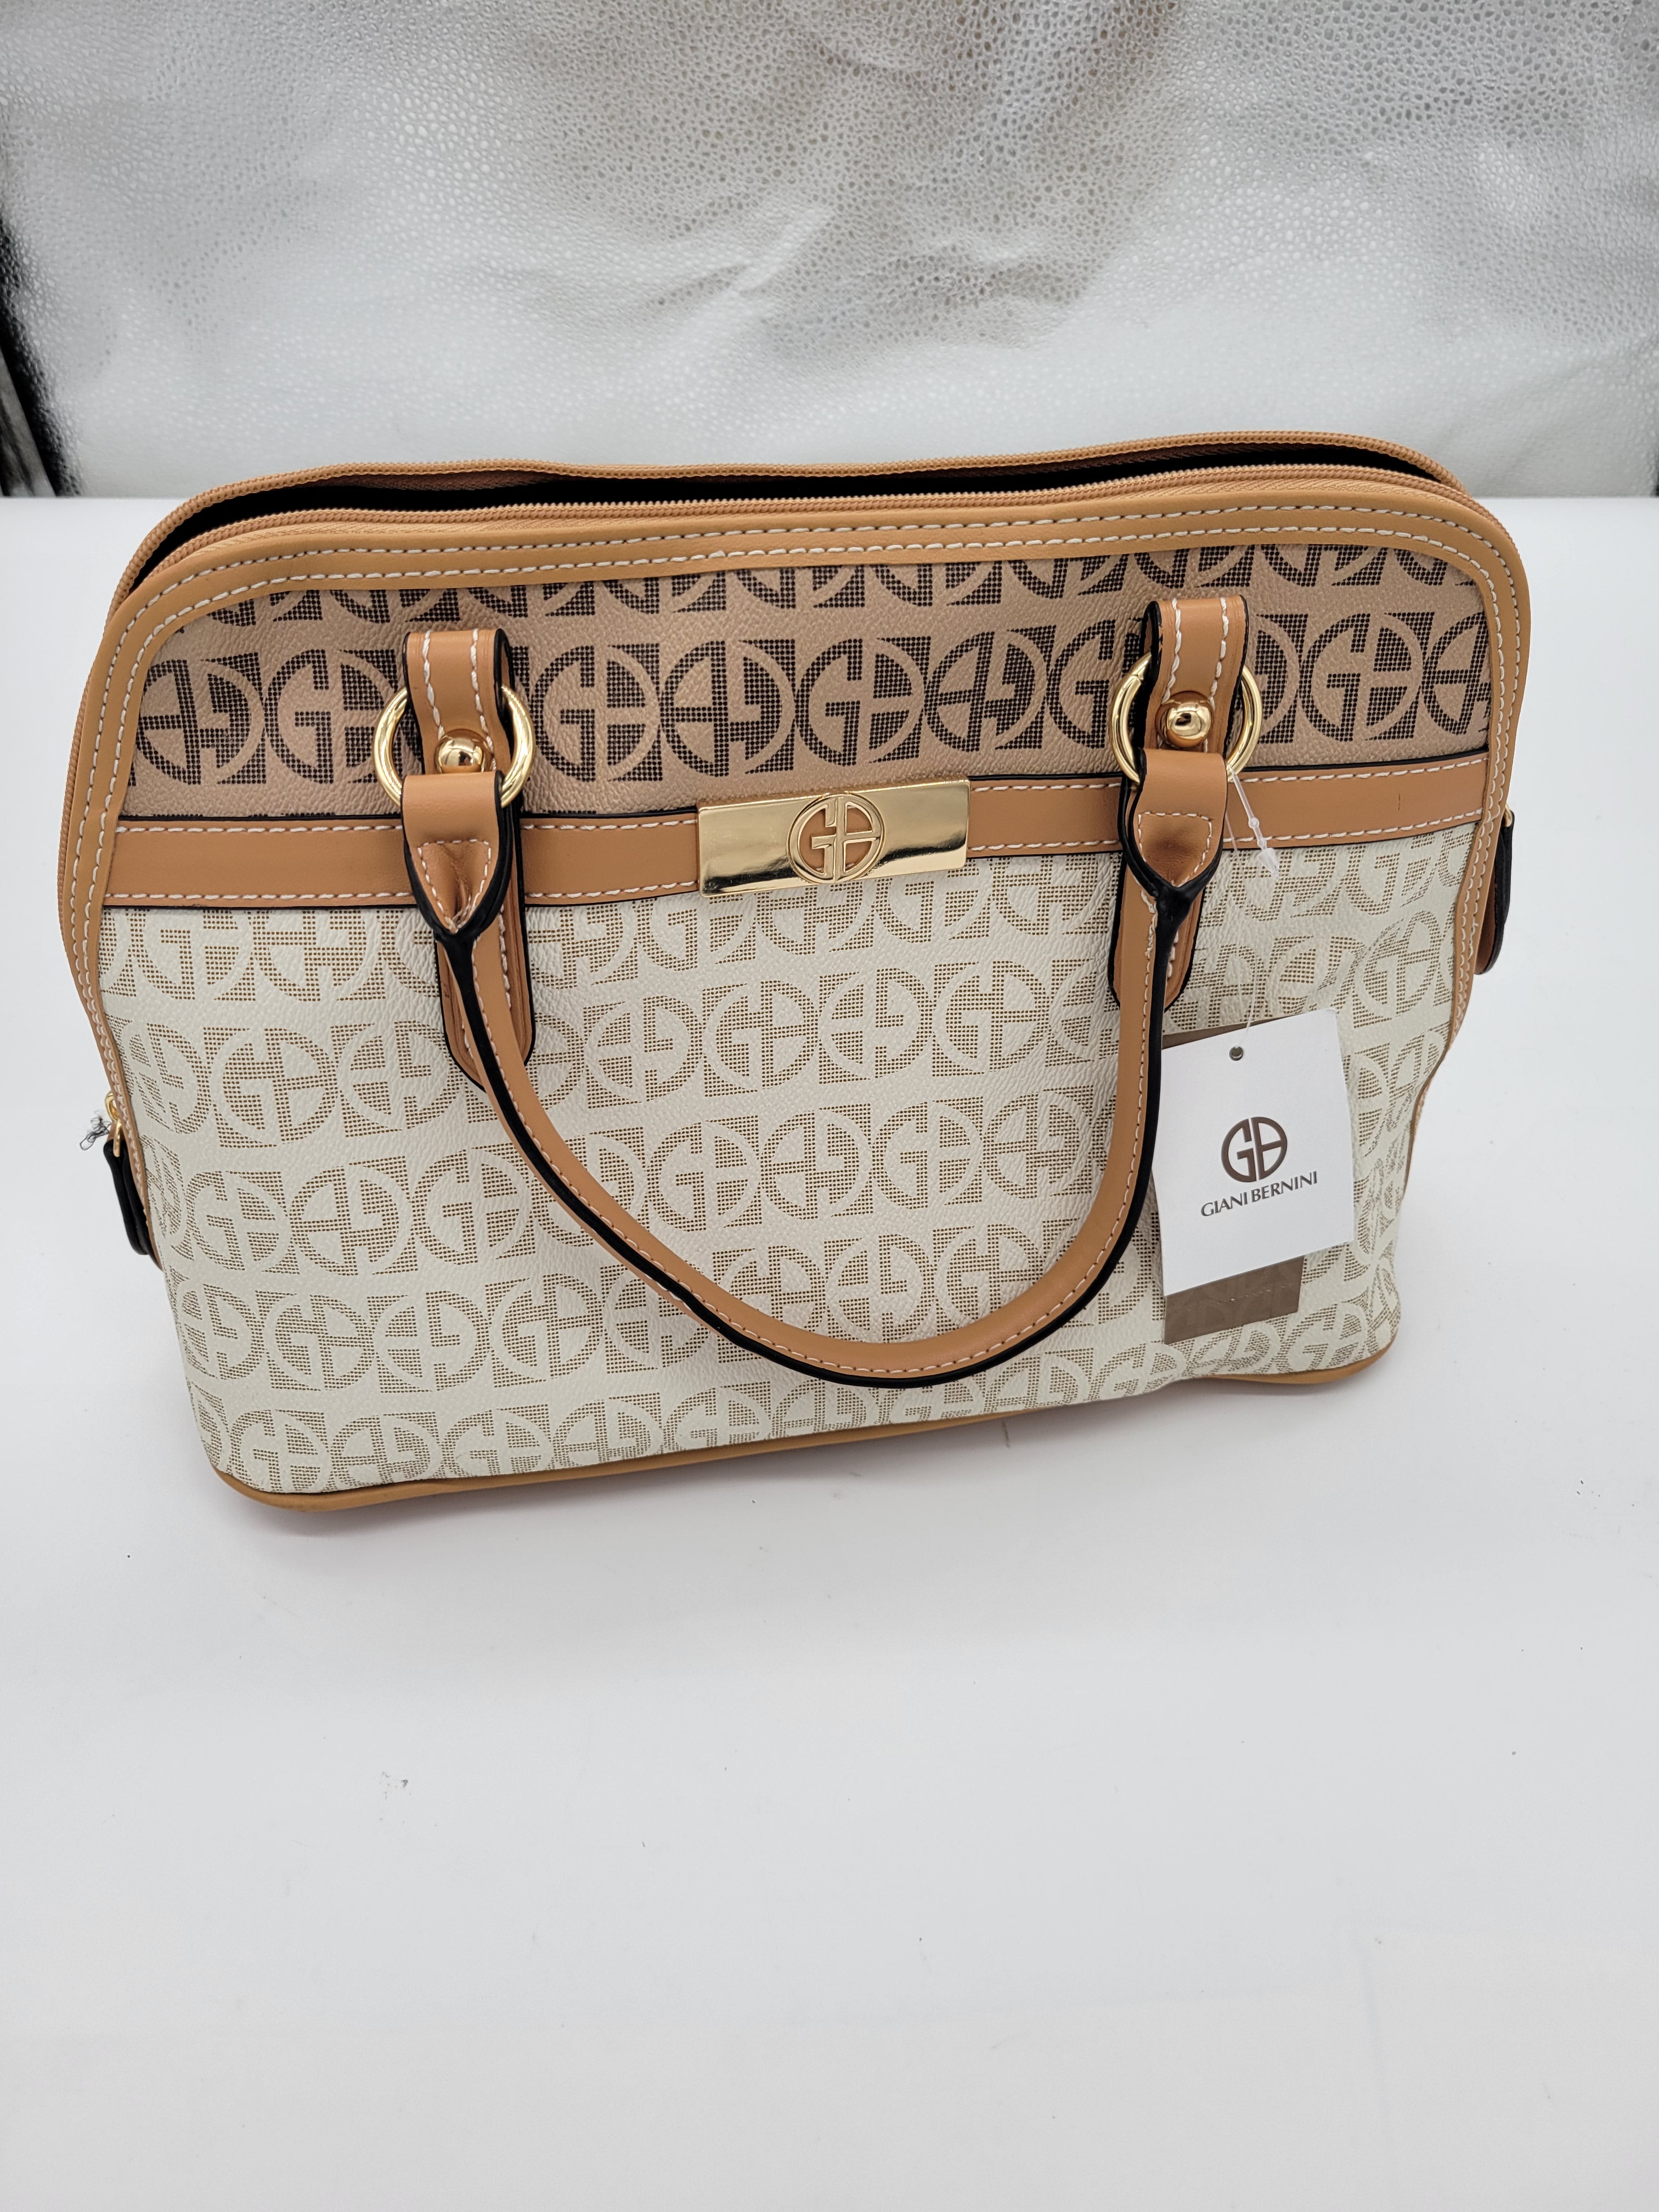 GIANI BERNINI Colorblock Dome Satchel in Ivory and Taupe